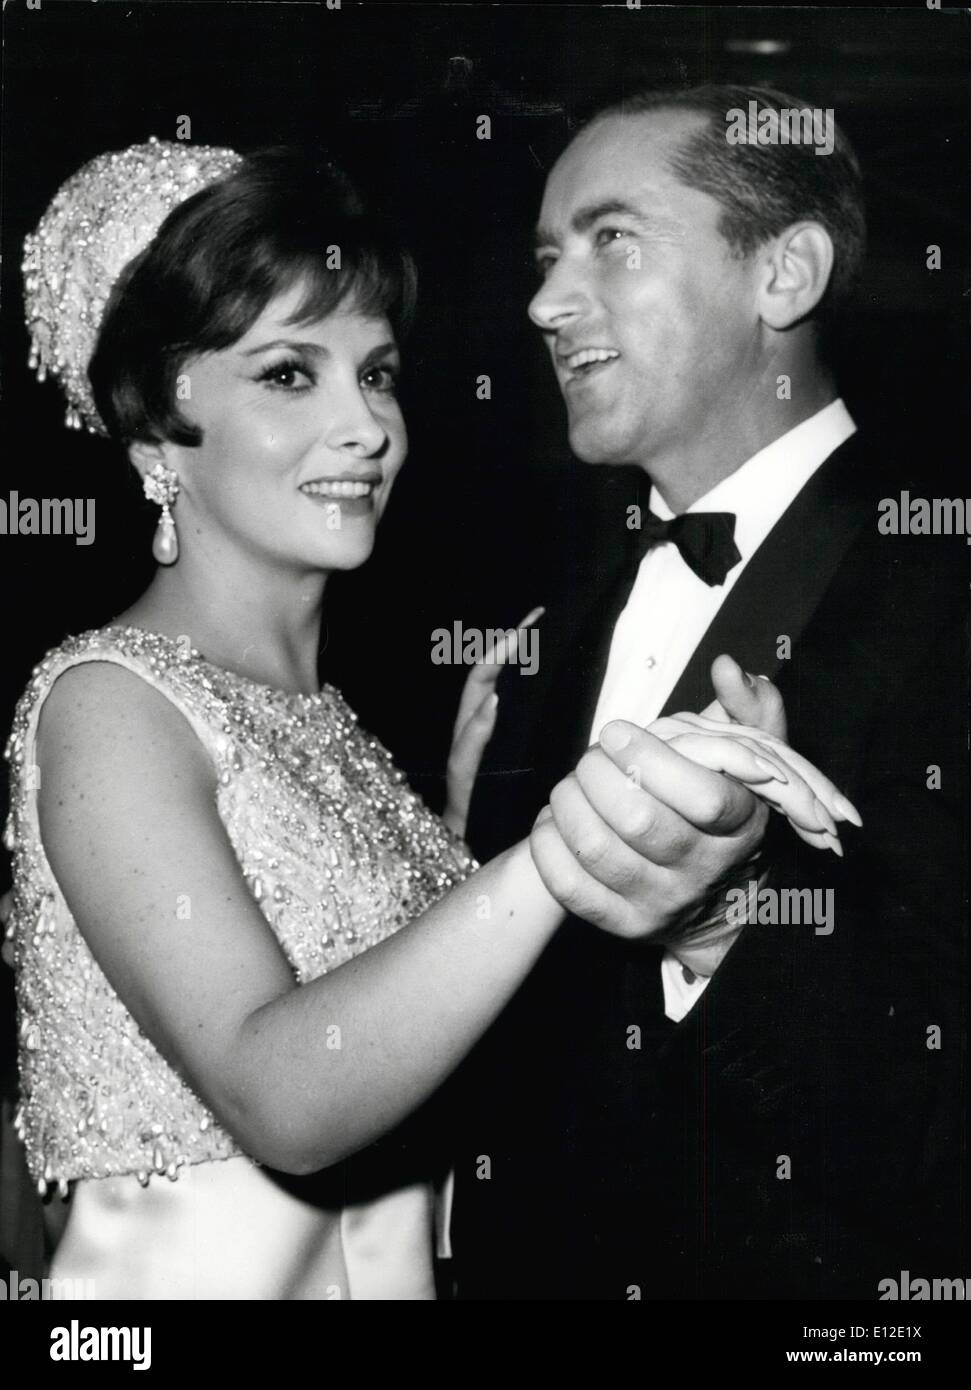 Dec. 15, 2011 - Rome, Gana 1966. Italian film star Gina Lollobrigida and her husband Dr. Mike Skofic, have split up after 17 years of marriage. They have parted by mutual consentÃ Stock Photo